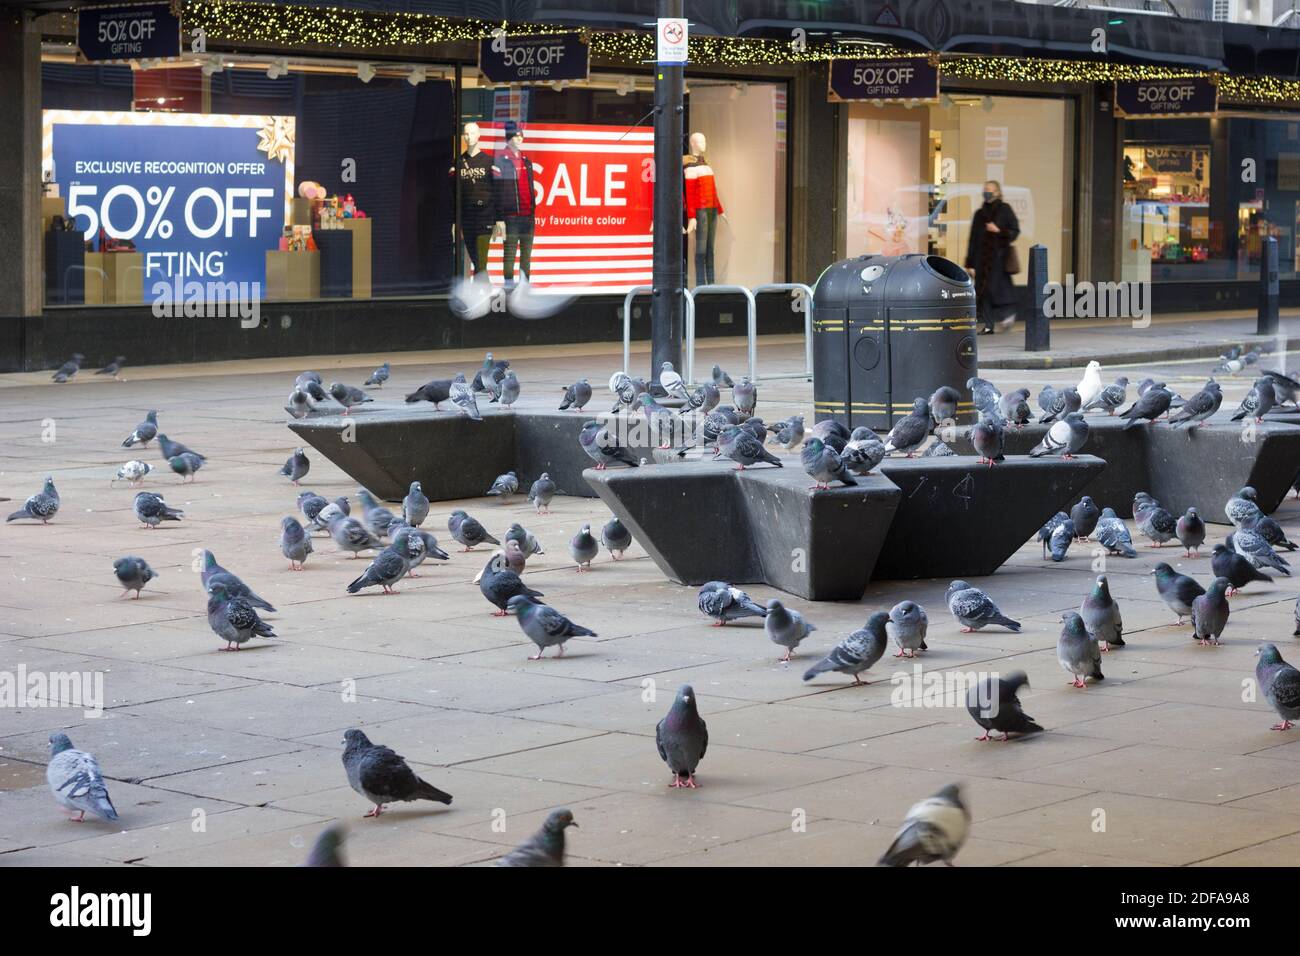 many Pigeons occupied pavement outside House of Fraser  store displaying huge sale sign of half price off at black friday deals, London, UK Stock Photo